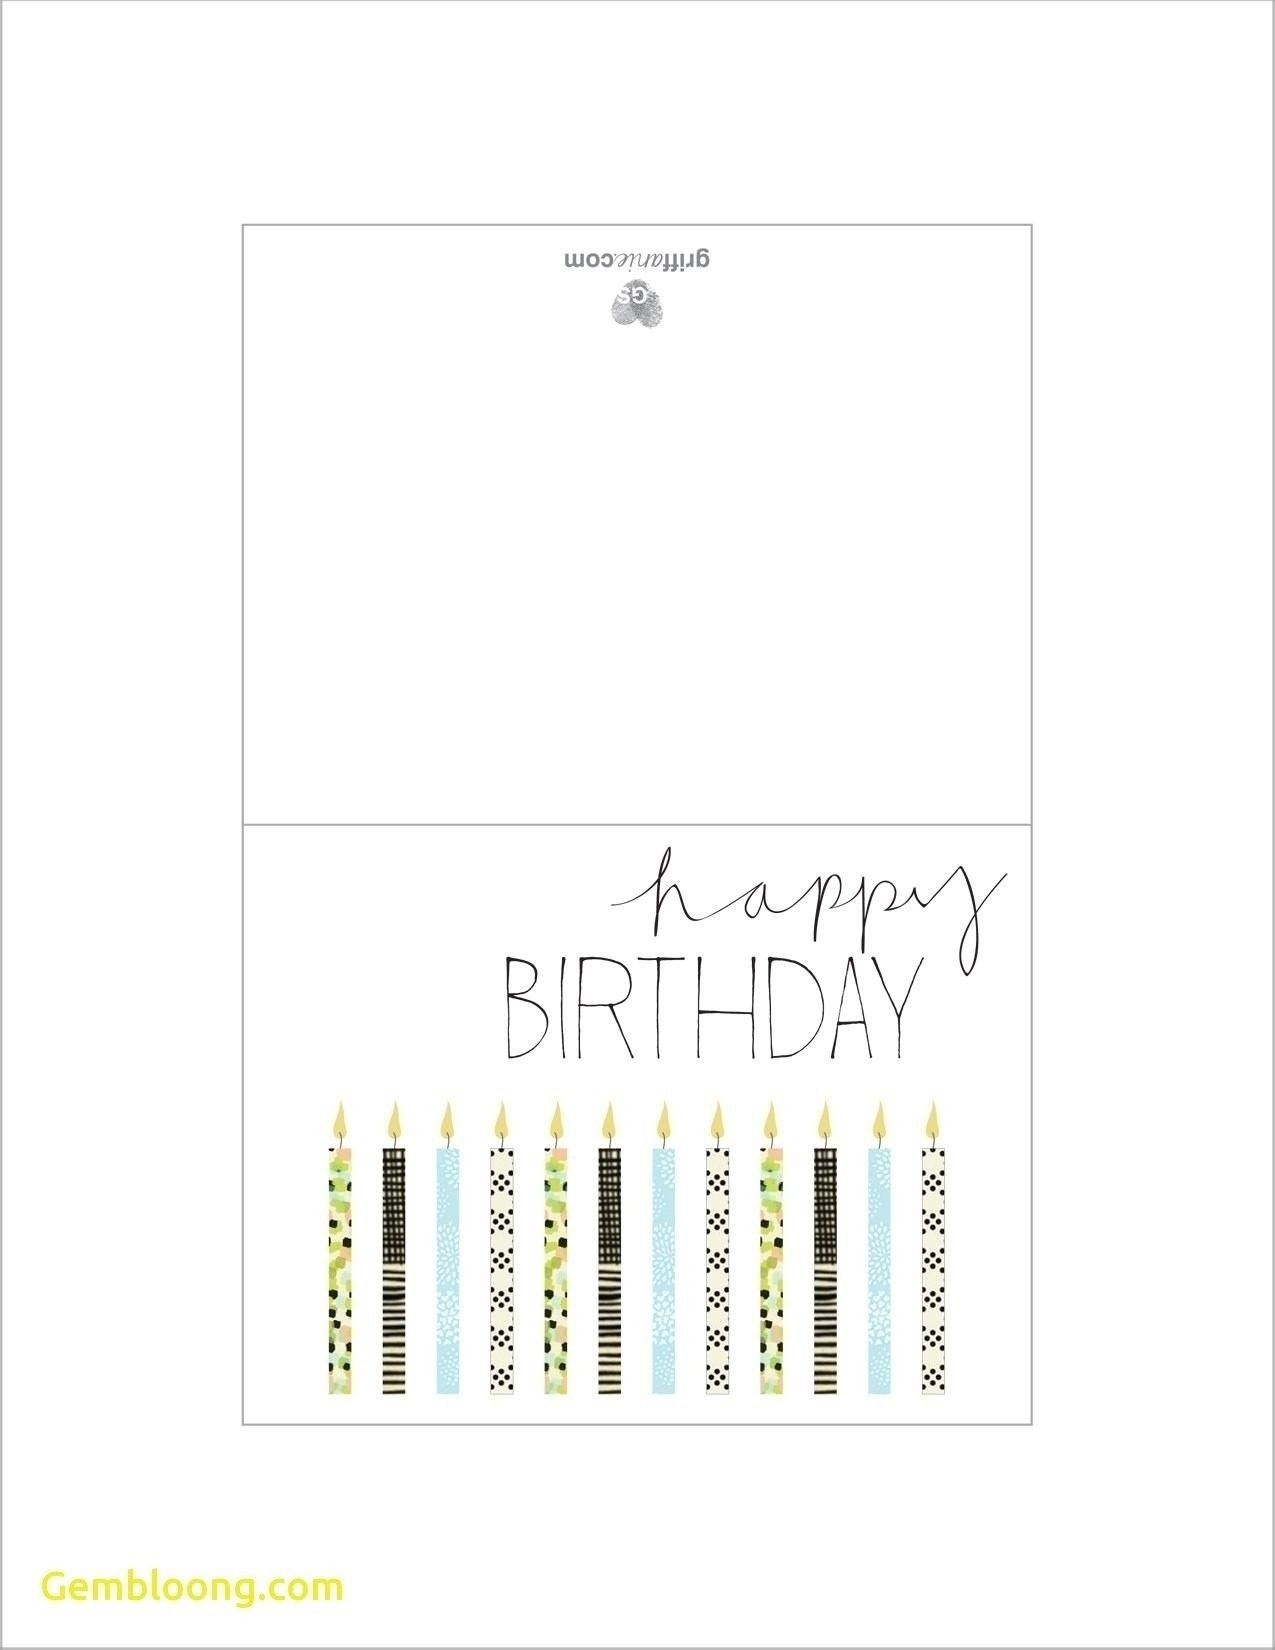 012 Printable Birthday Card Template Ideas Cards Foldable Intended For Card Folding Templates Free